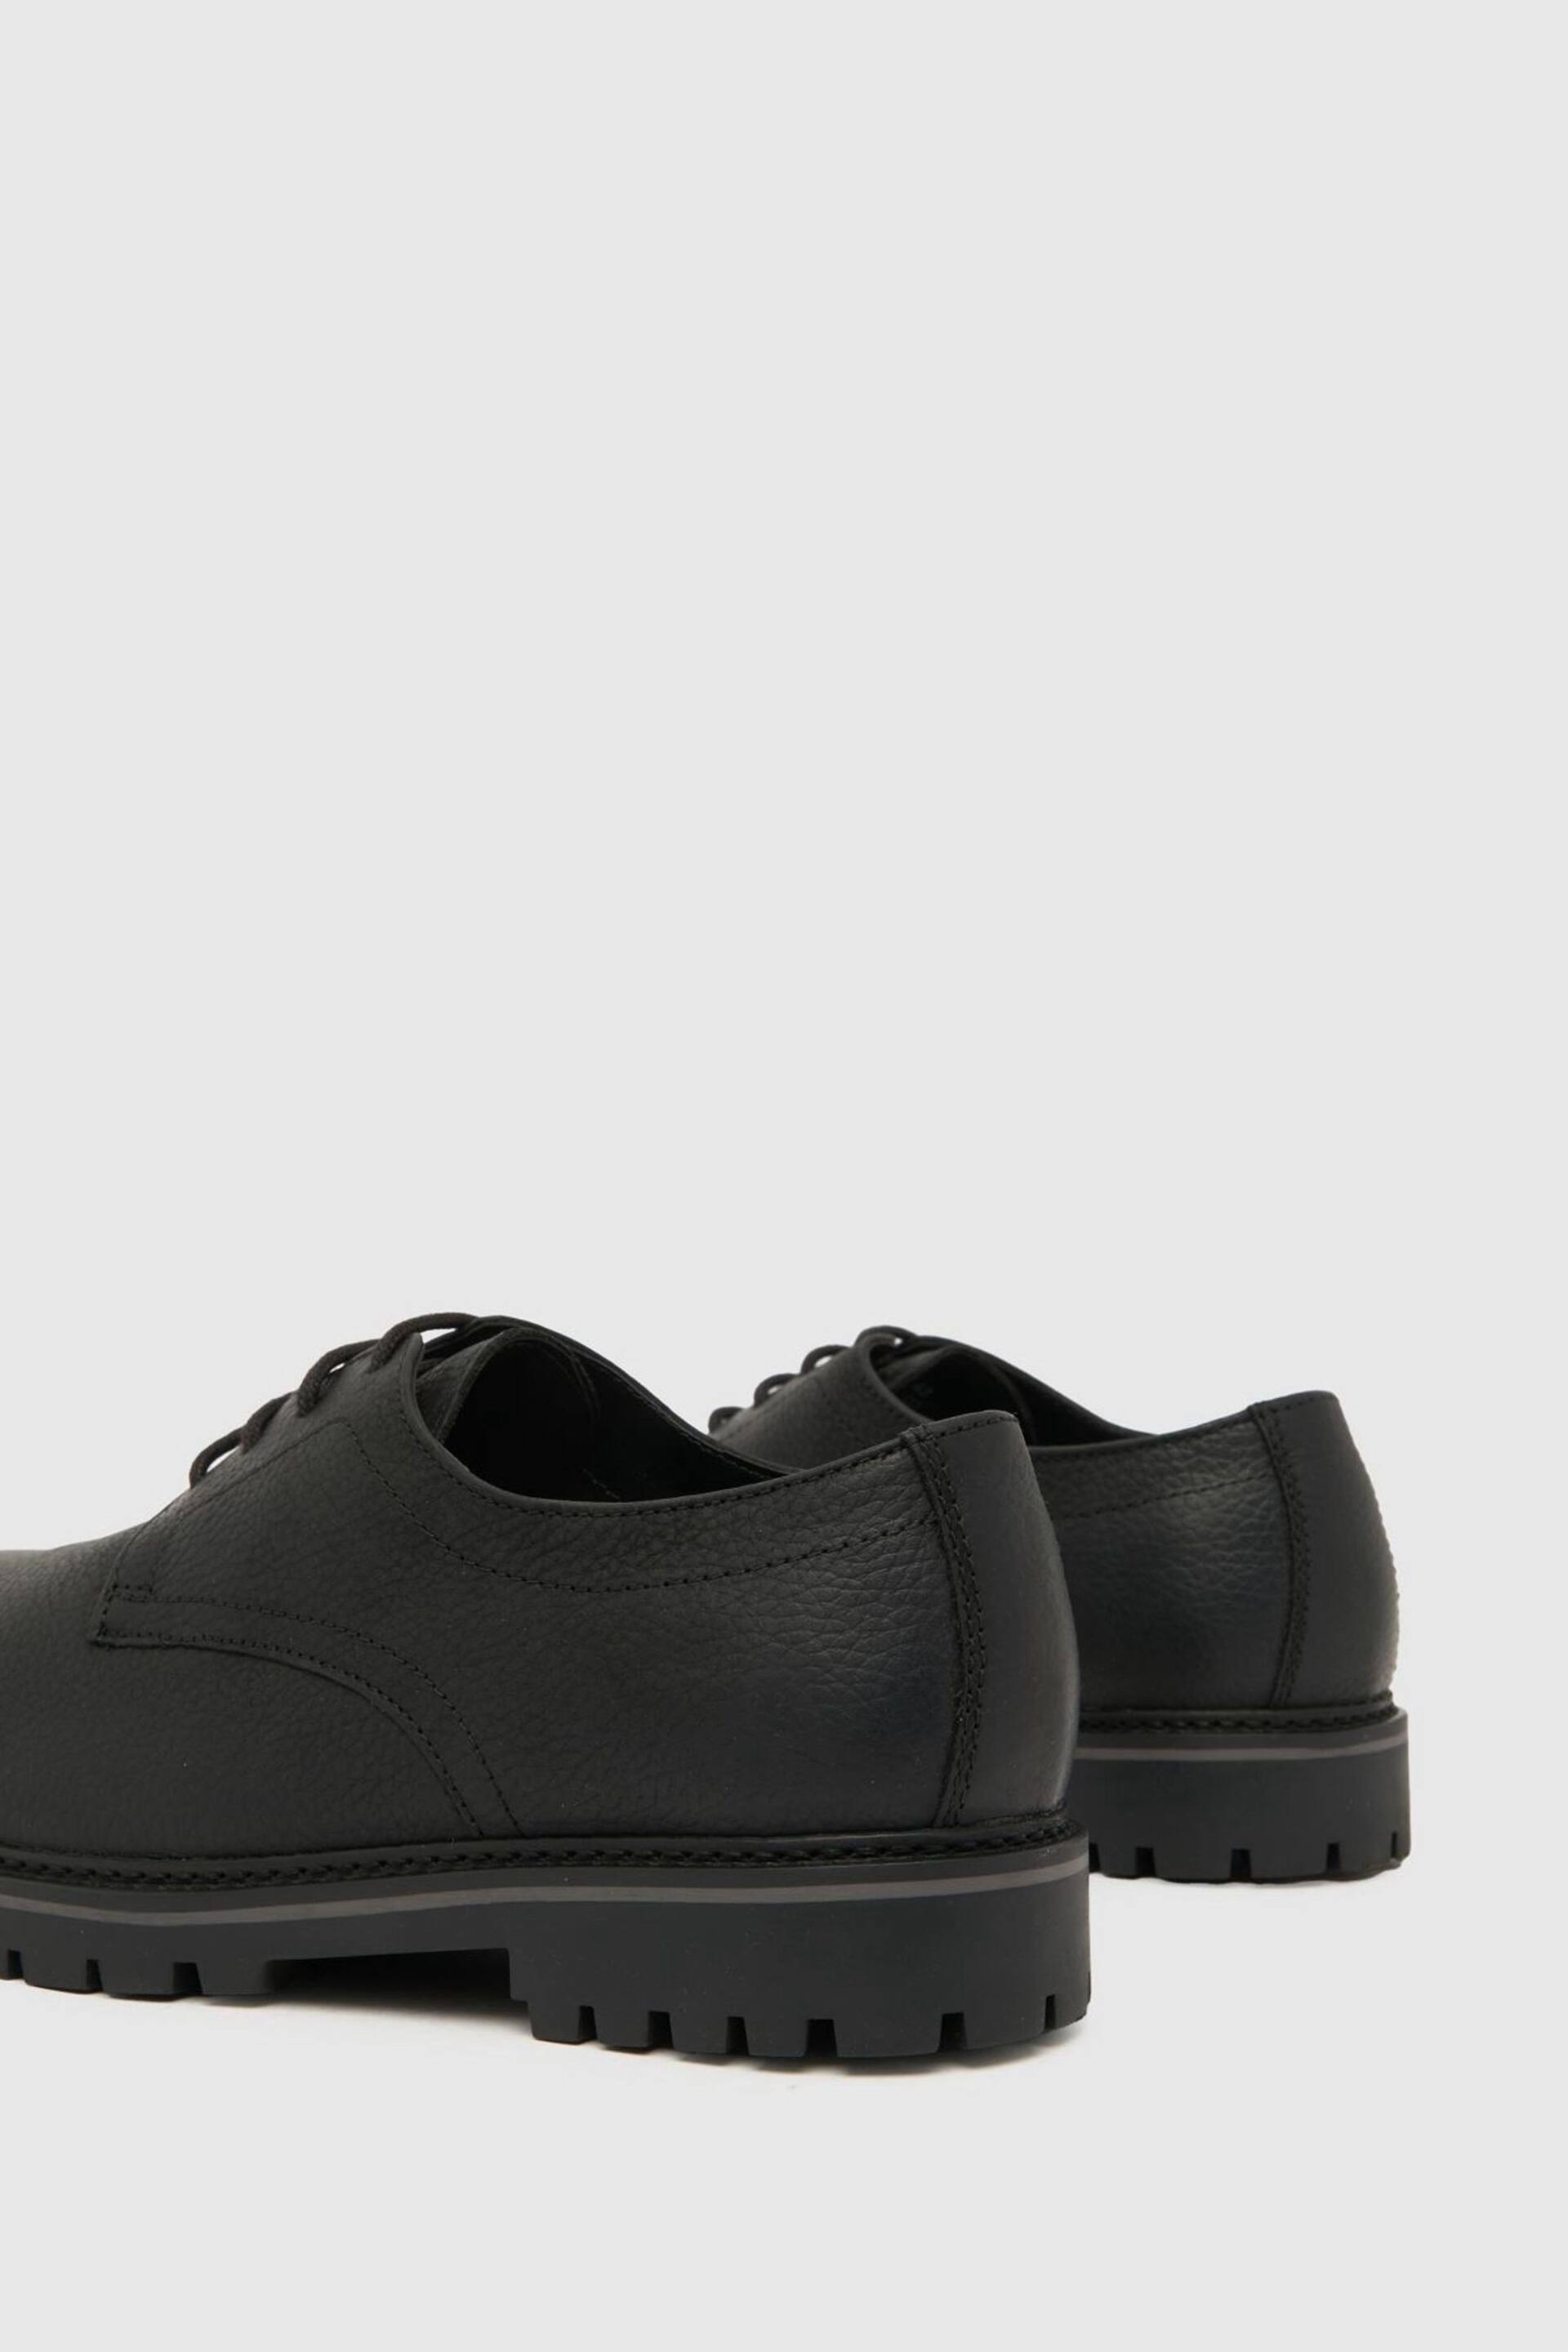 Schuh Paxon Leather Lace-Up Black Shoes - Image 4 of 4